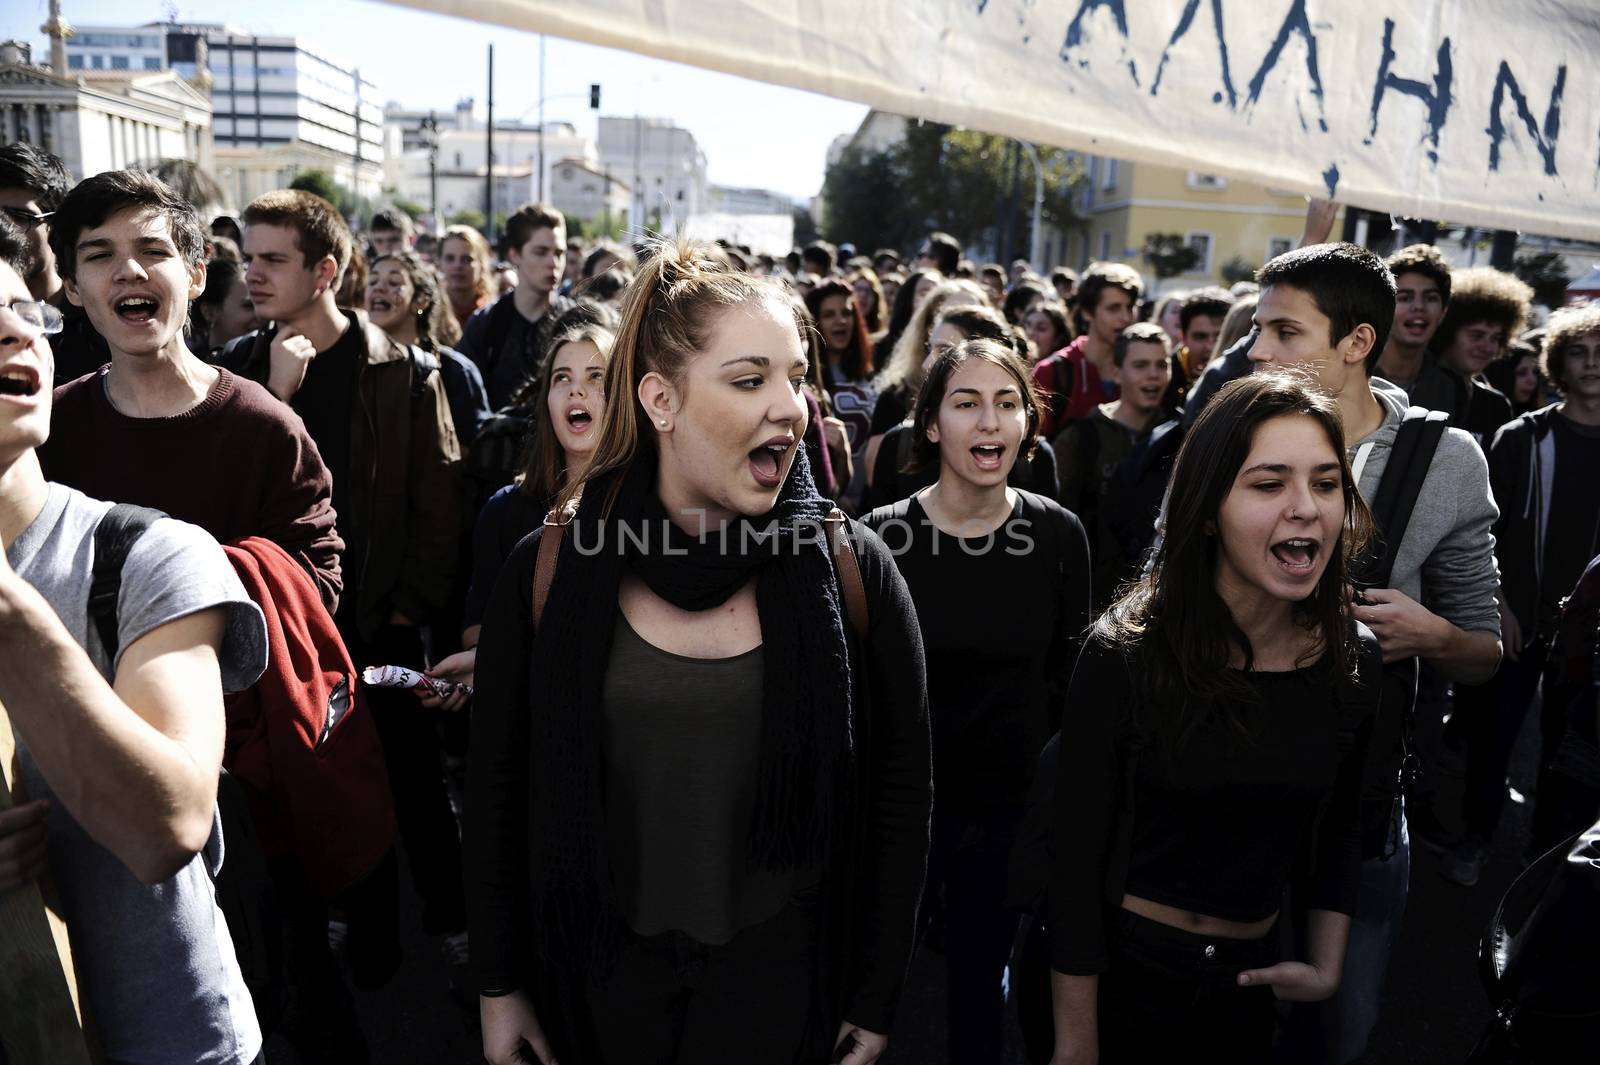 GREECE, Athens: Thousands of student-protesters fill the streets of Athens, Greece on November 2, 2015. The young demonstrators yell chants and carry signs as they rally against cuts to education and a shortage of teachers, amid ongoing protests against austerity in Greece. Reports from local media indicate that a contingent had broken off from the larger protest, vandalizing a cell phone store, and trying to damage a bank on Othonos, a street in Athens.